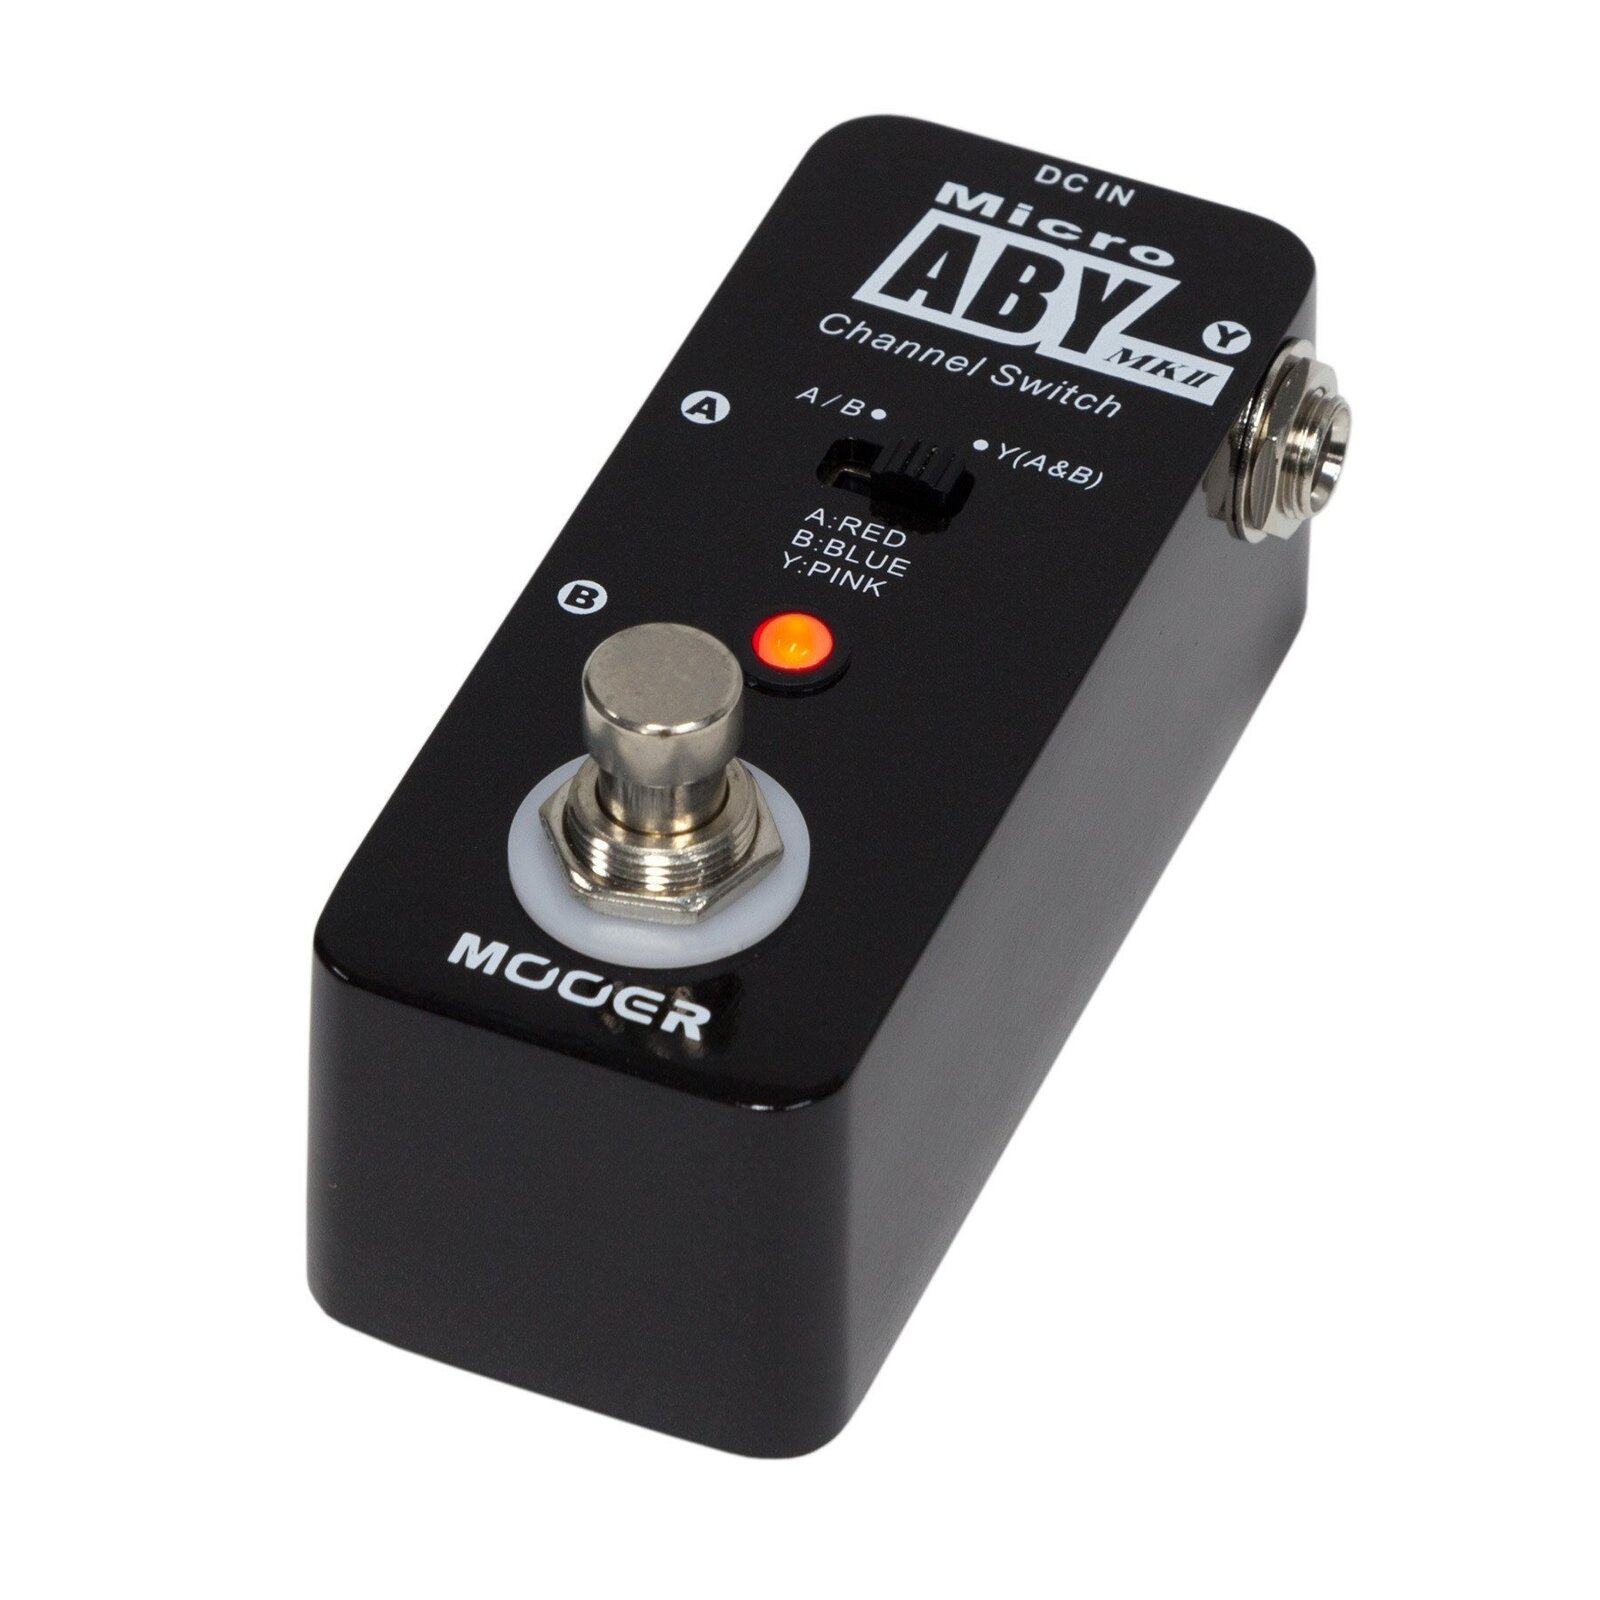 Dertig Leerling Desillusie Mooer ABY Channel Switching Micro Guitar Effects Pedal